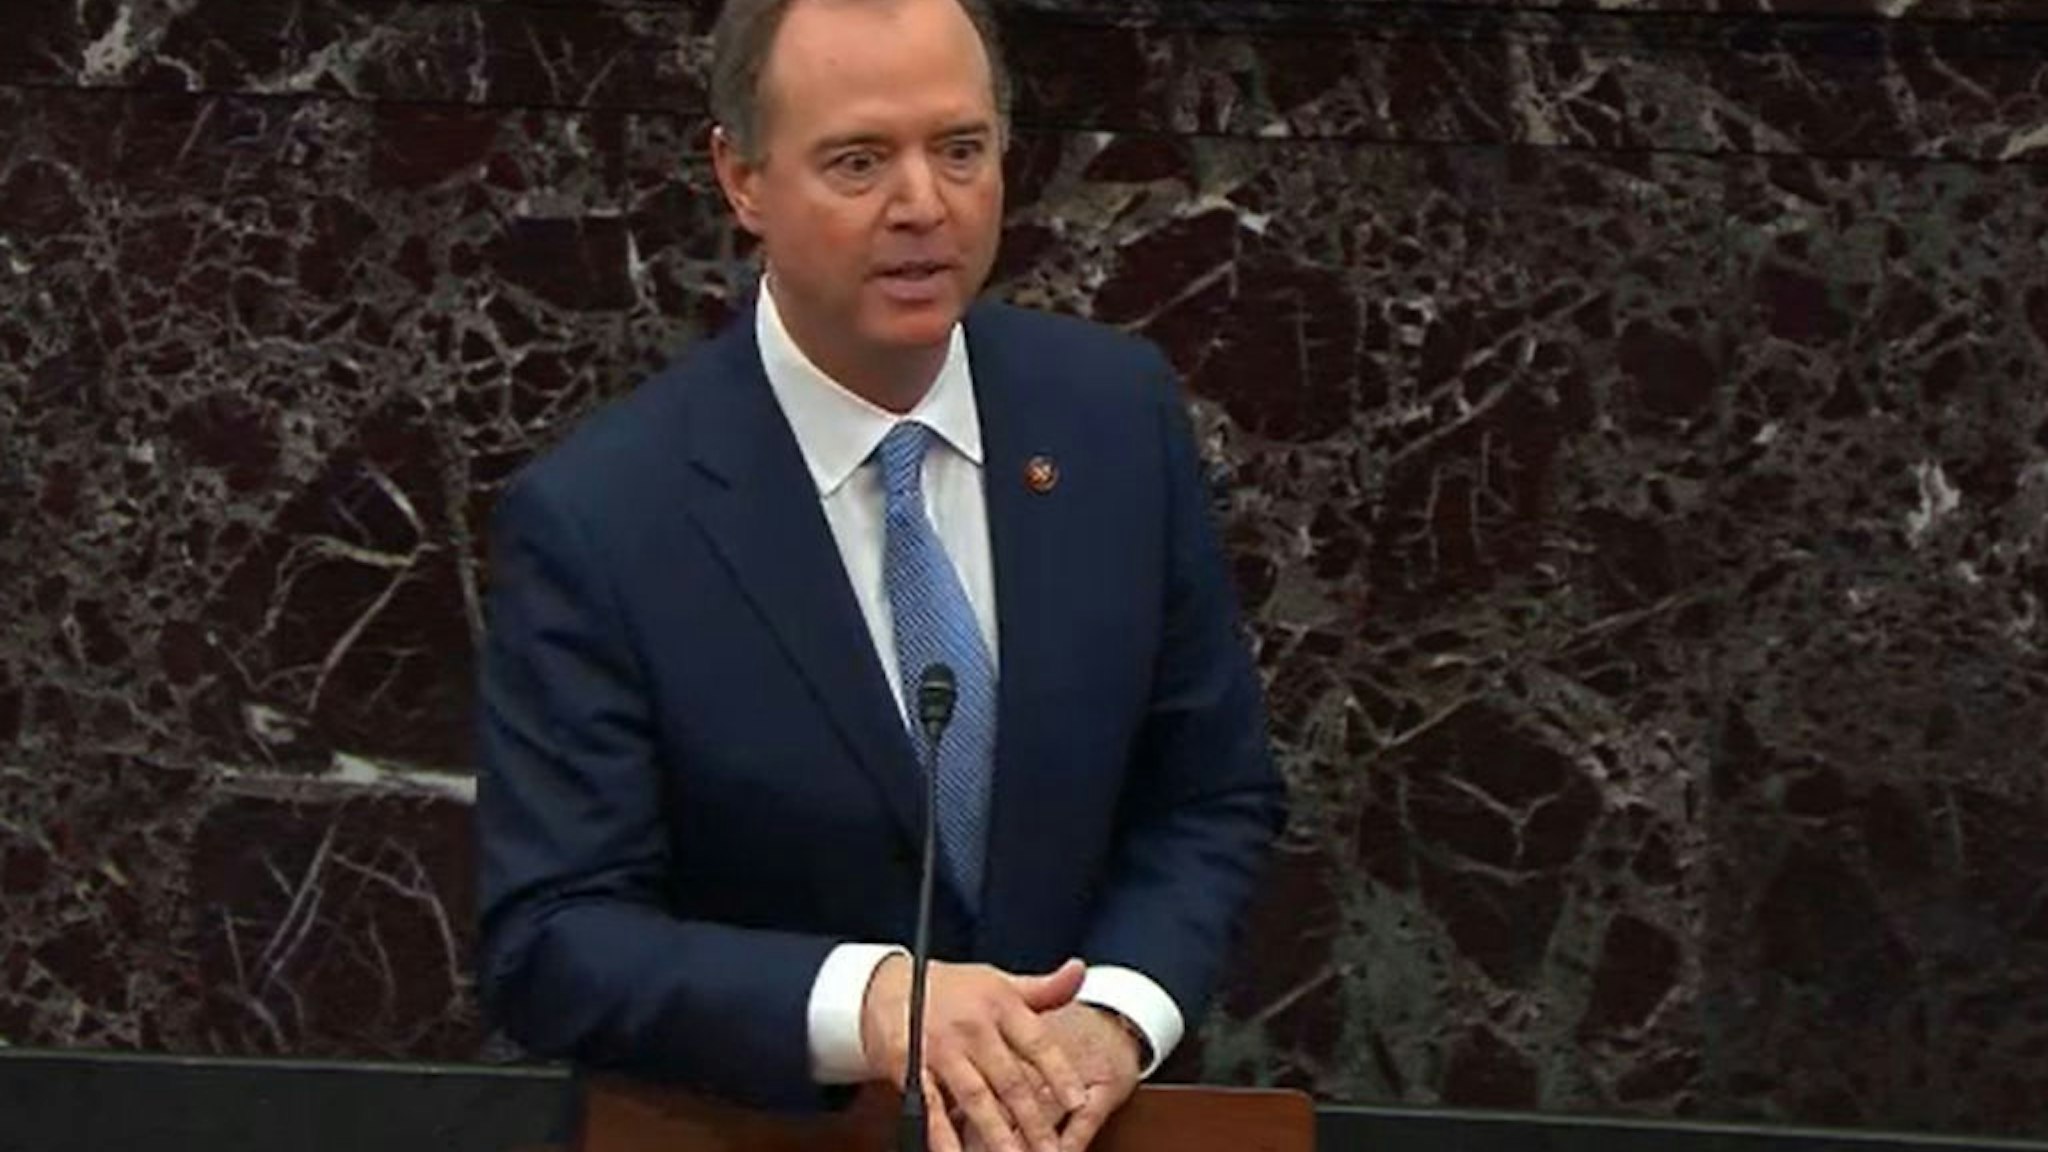 In this screengrab taken from a Senate Television webcast, House impeachment manager Rep. Adam Schiff (D-CA) speaks during impeachment proceedings against U.S. President Donald Trump in the Senate at the U.S. Capitol on January 24, 2020 in Washington, DC.